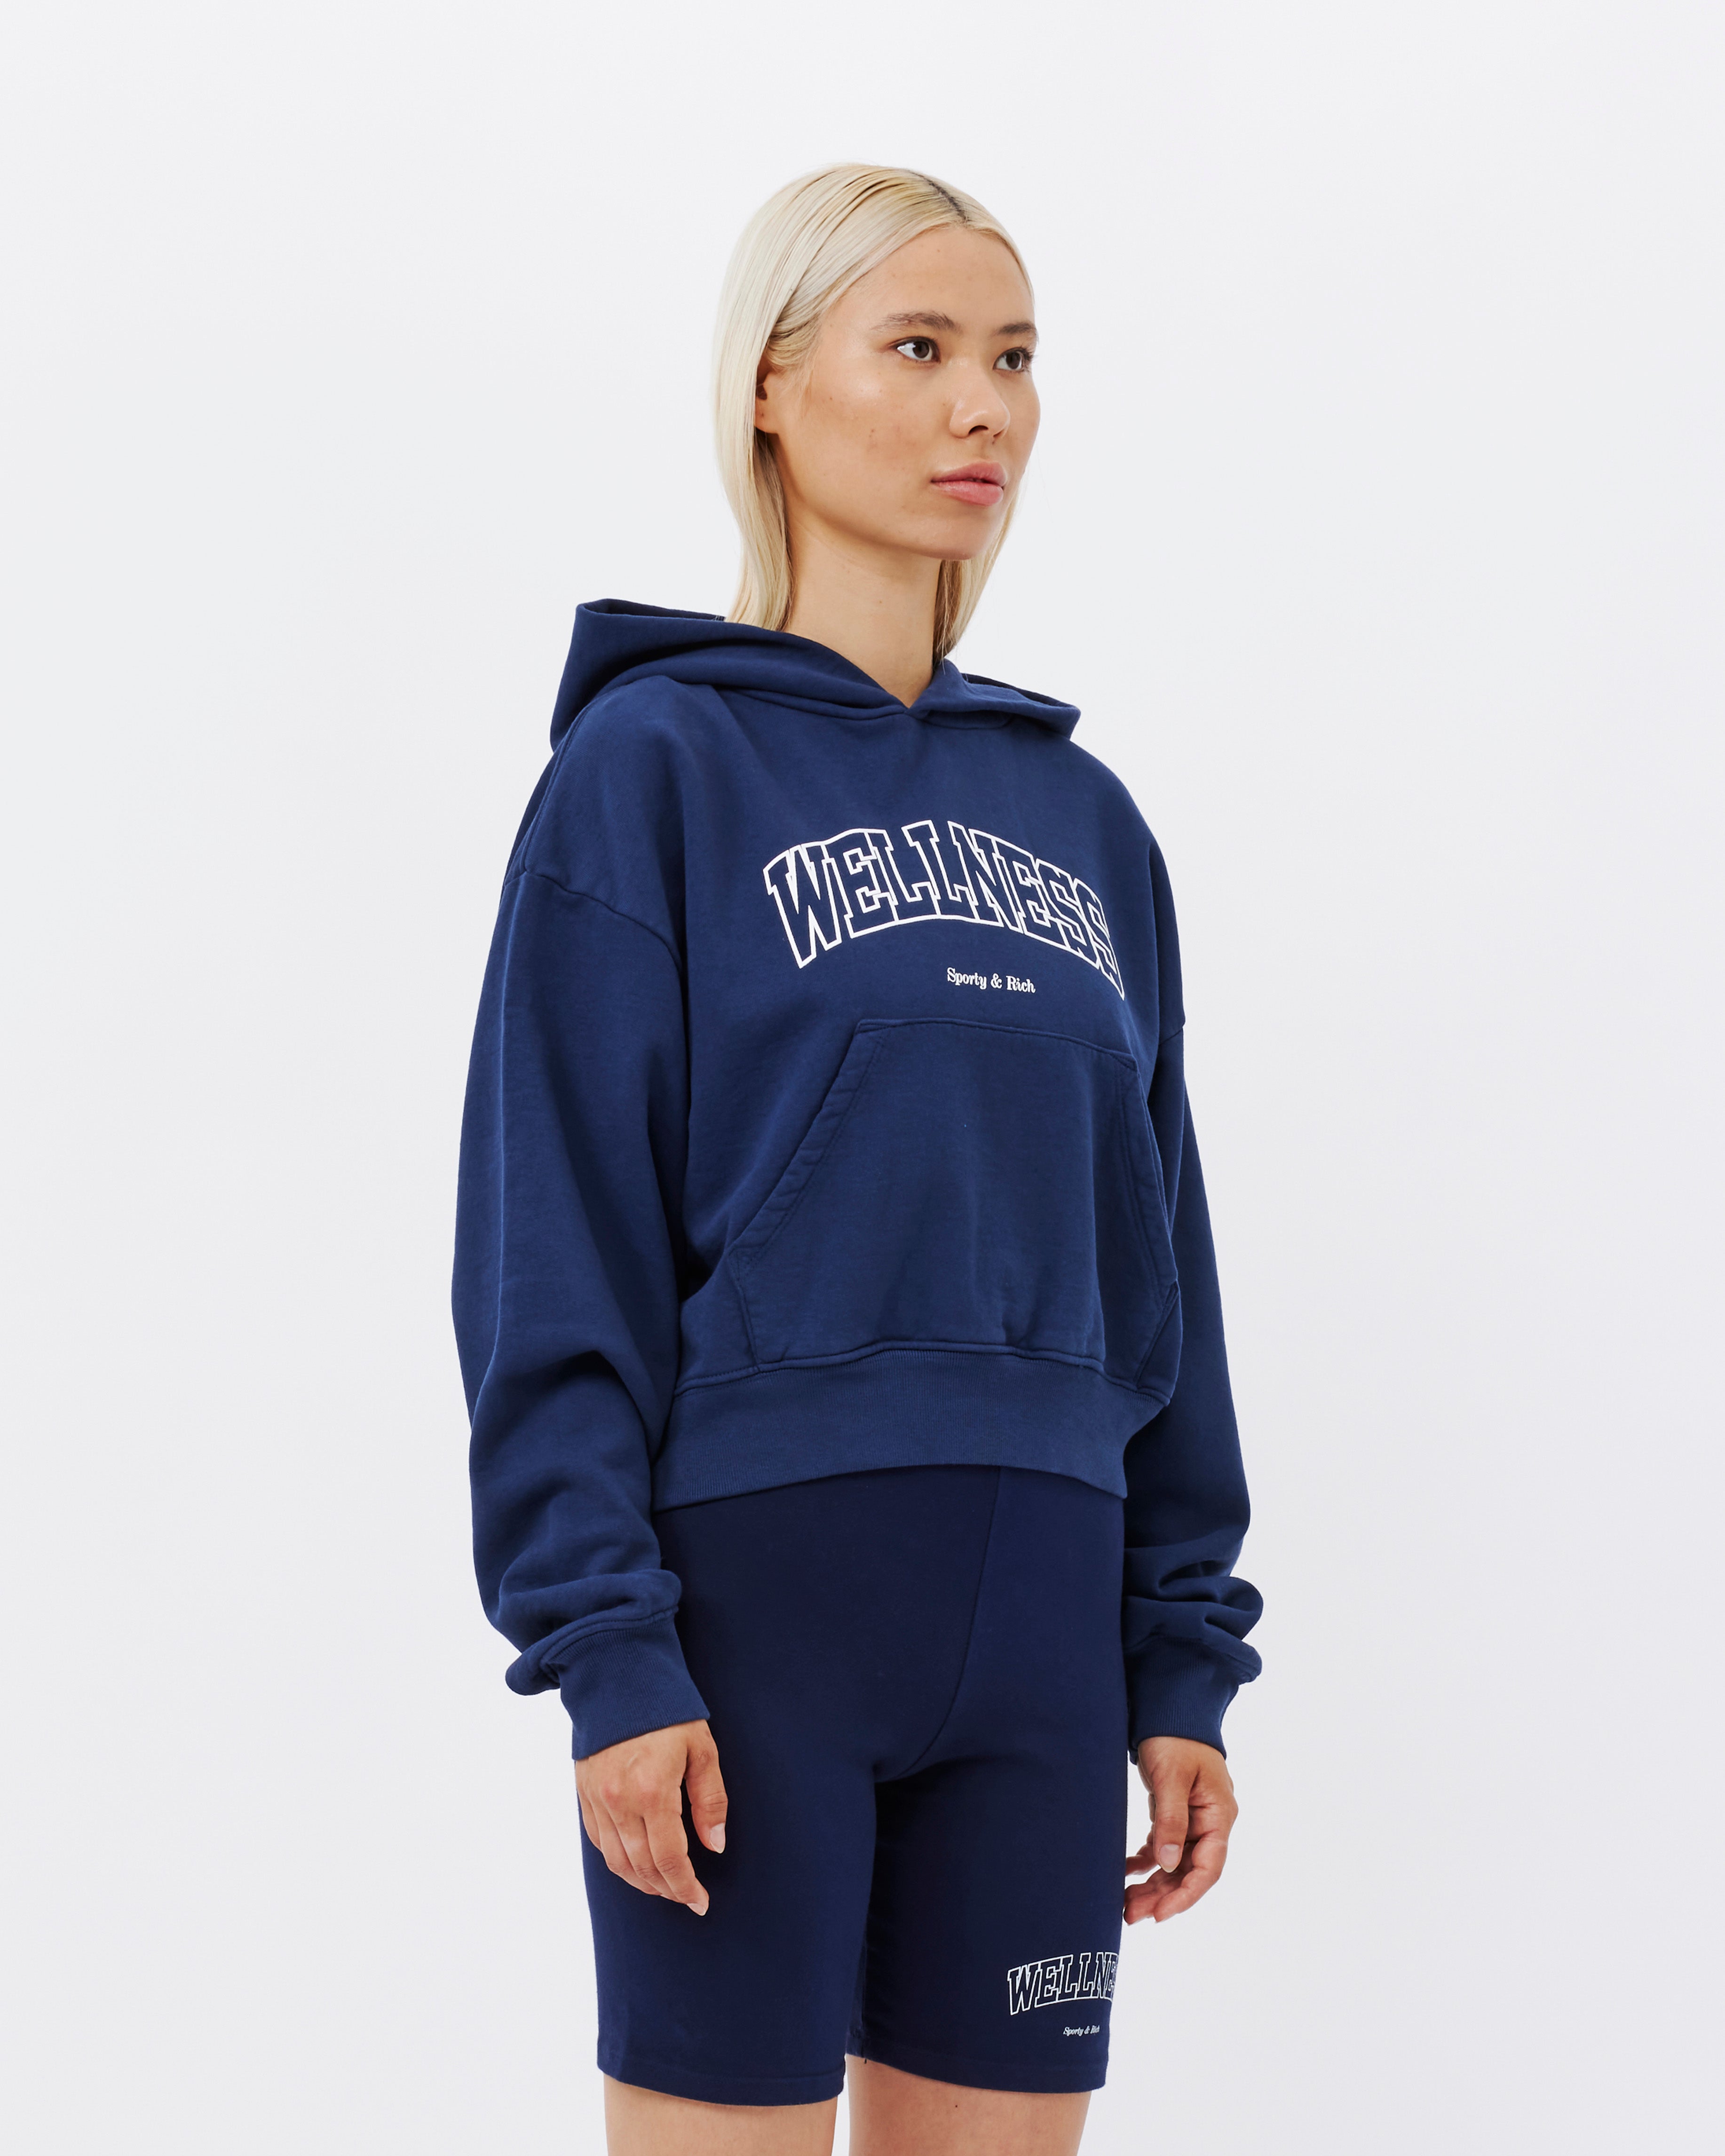 Sporty & Rich Wellness Ivy Cropped Hoodie Navy HC851NA